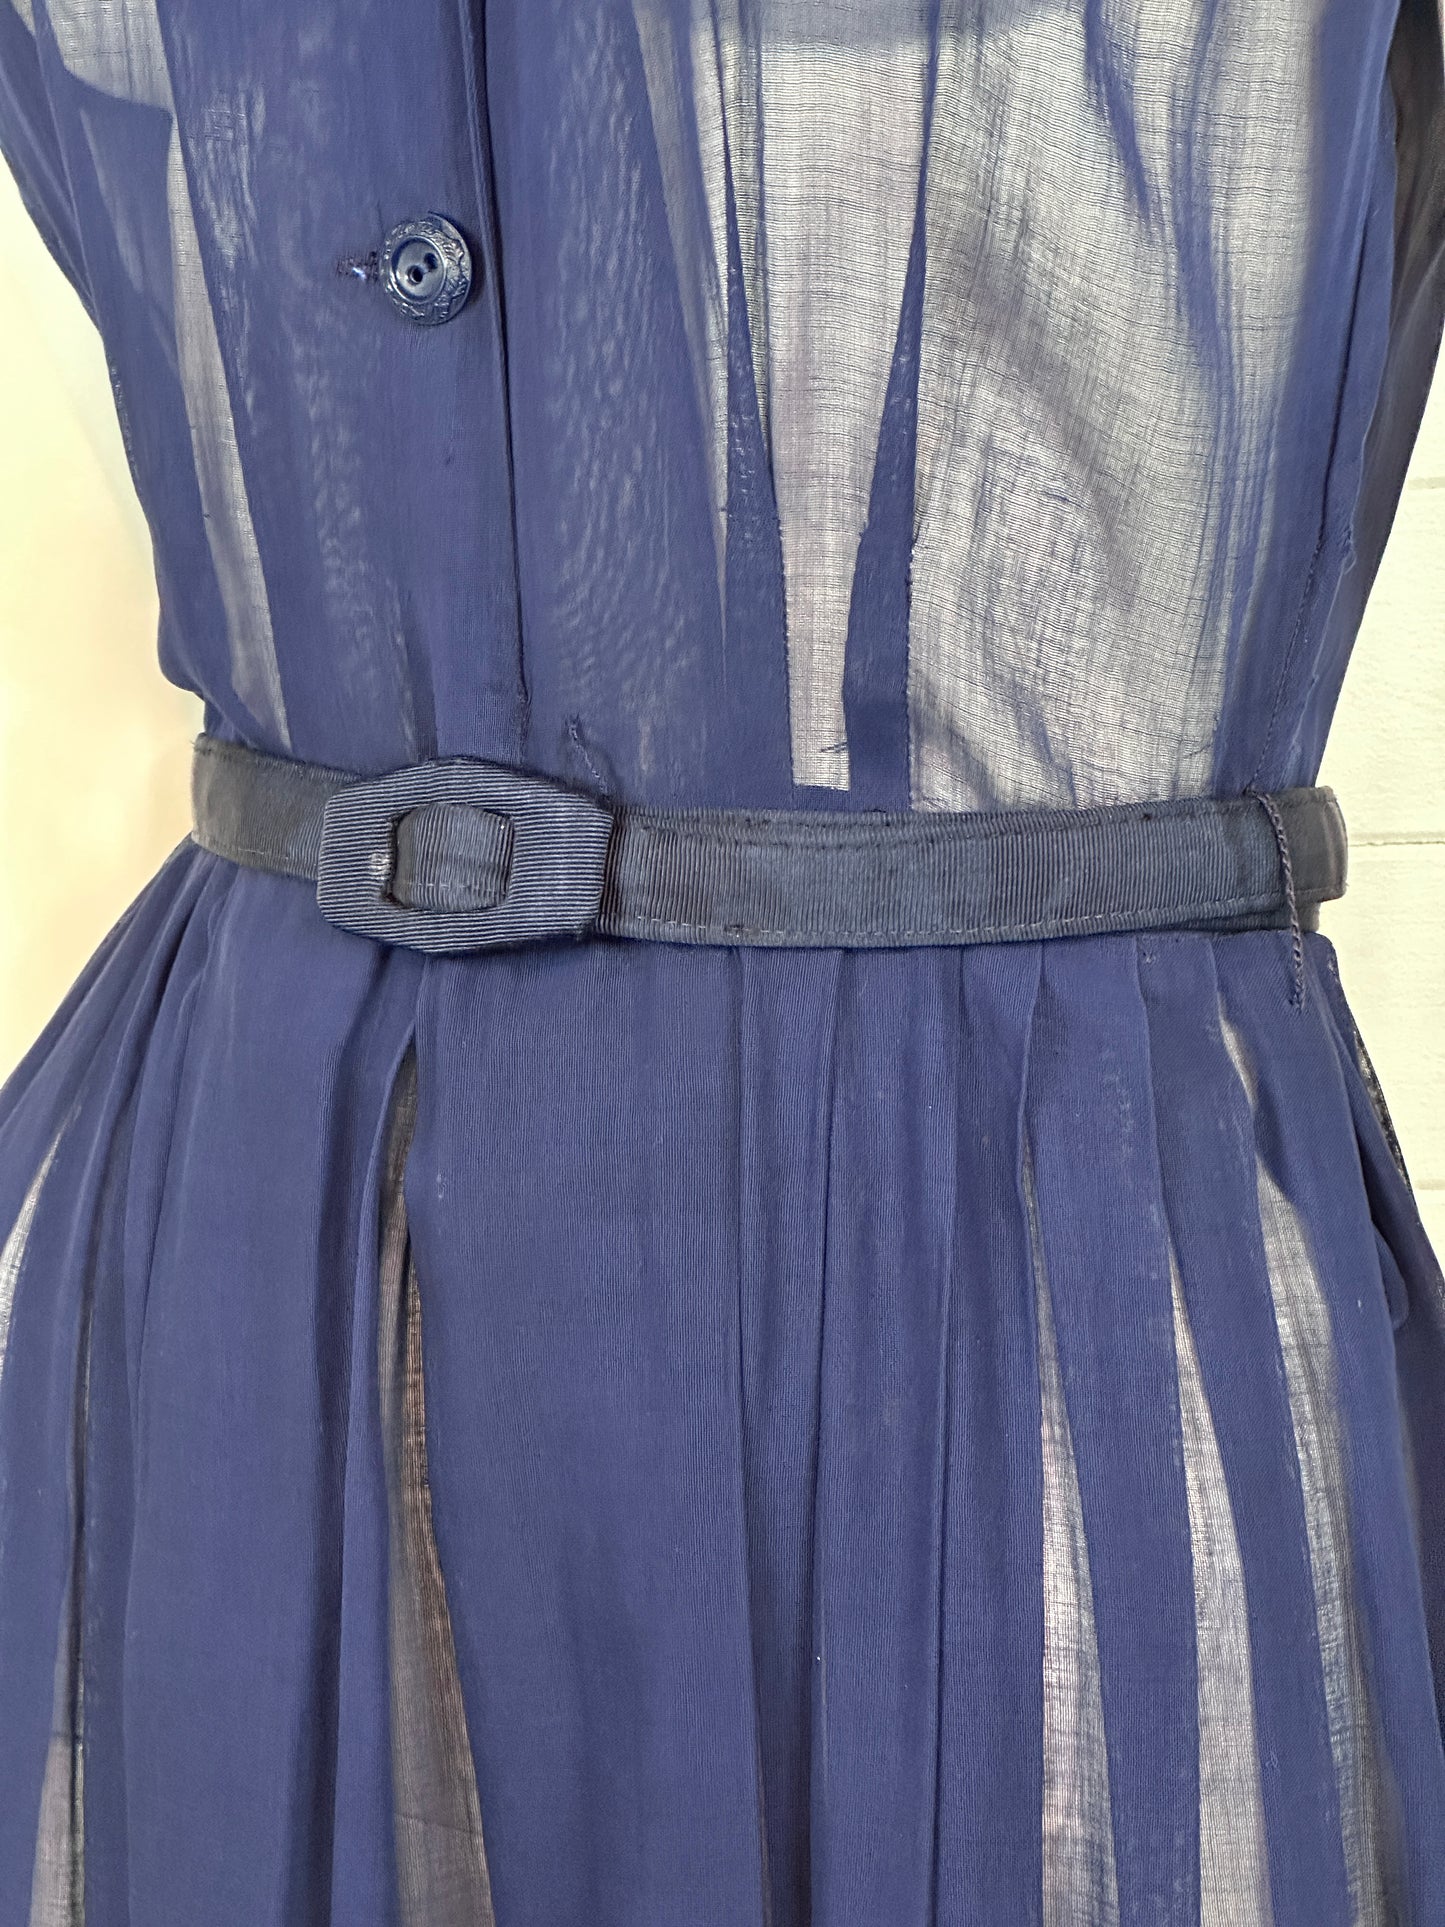 1940's Sheer Navy Shirtwaist Day Dress with Pleated Skirt (S-M)